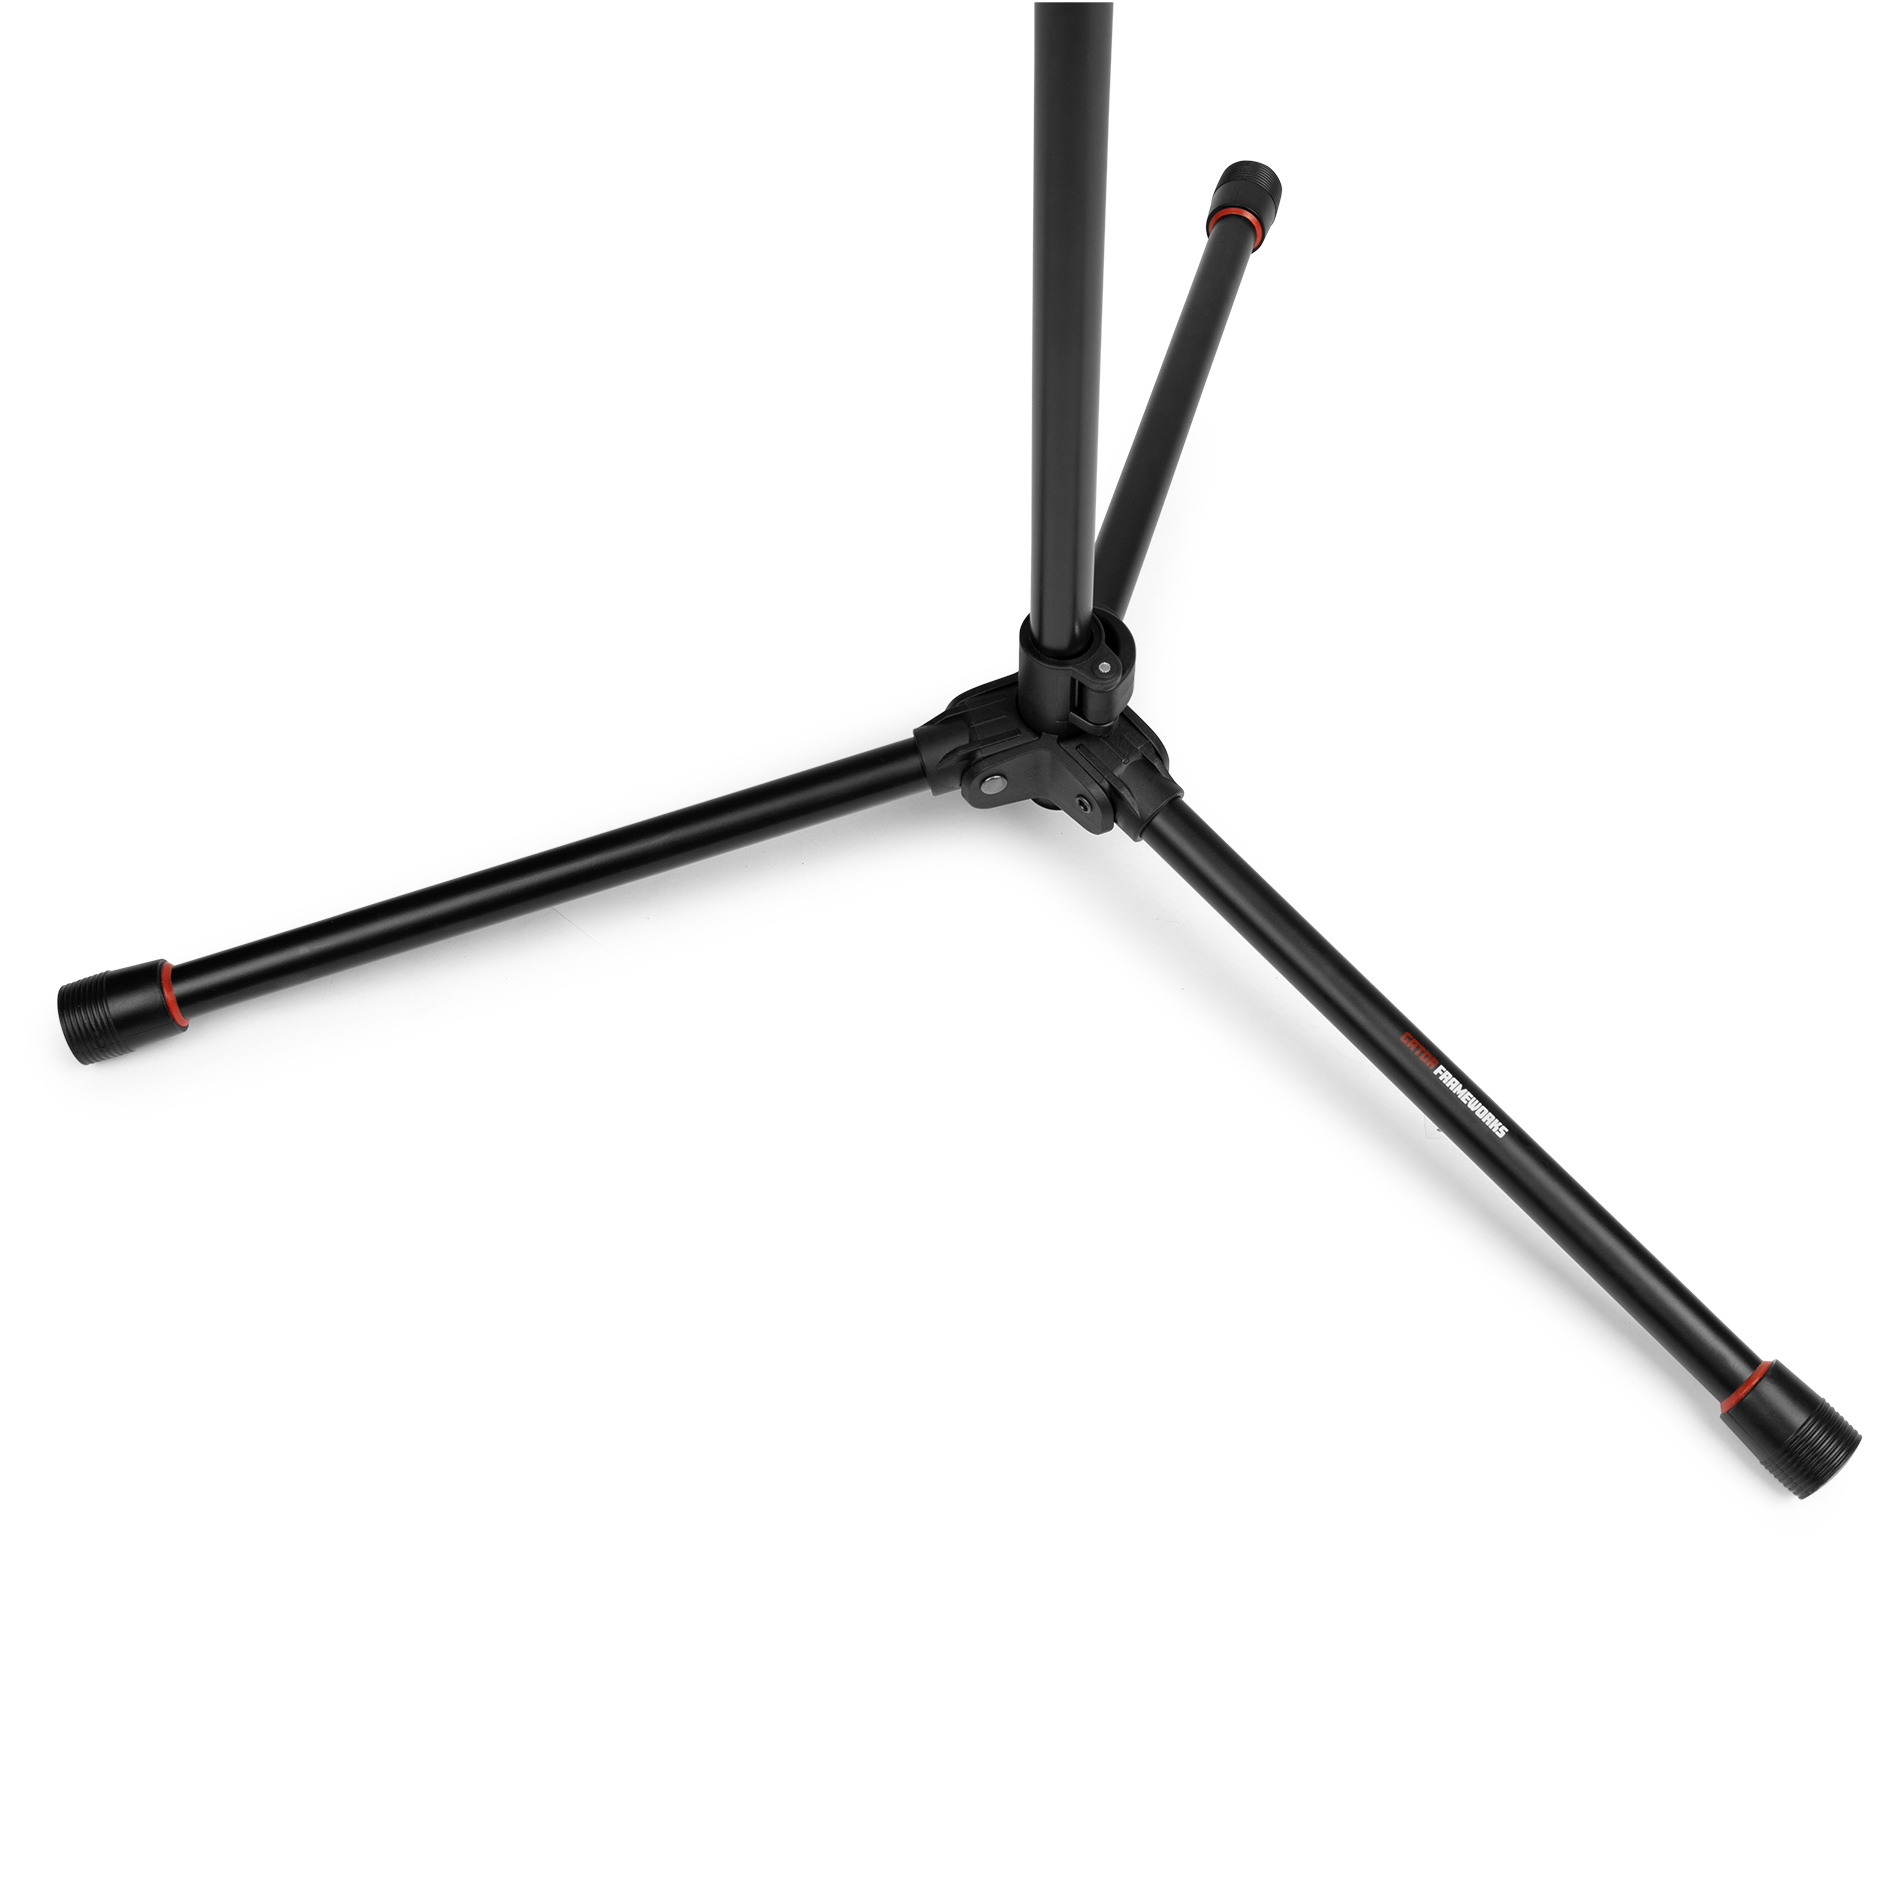 Compact Fixed Boom Mic Stand with Tripod Base